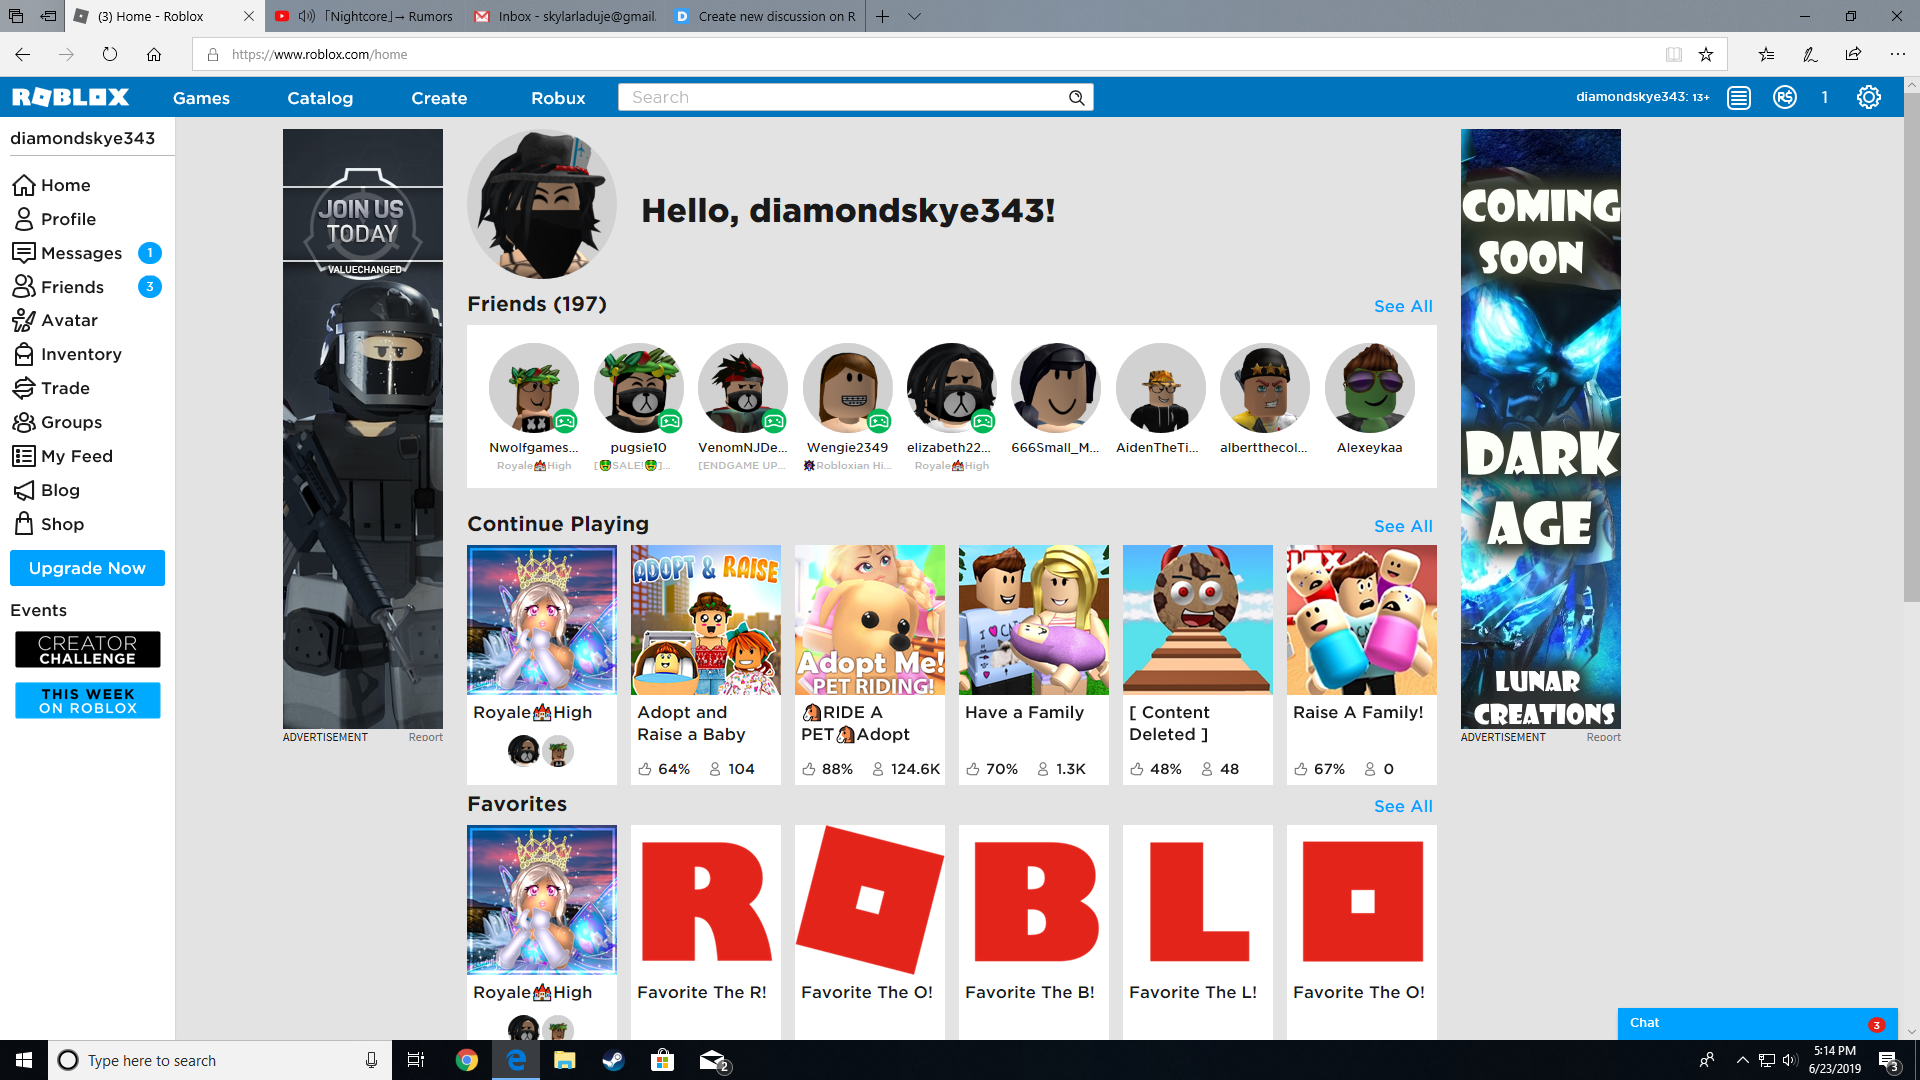 Join Me On Roblox 3 Rianul Kingdom Disqus - 